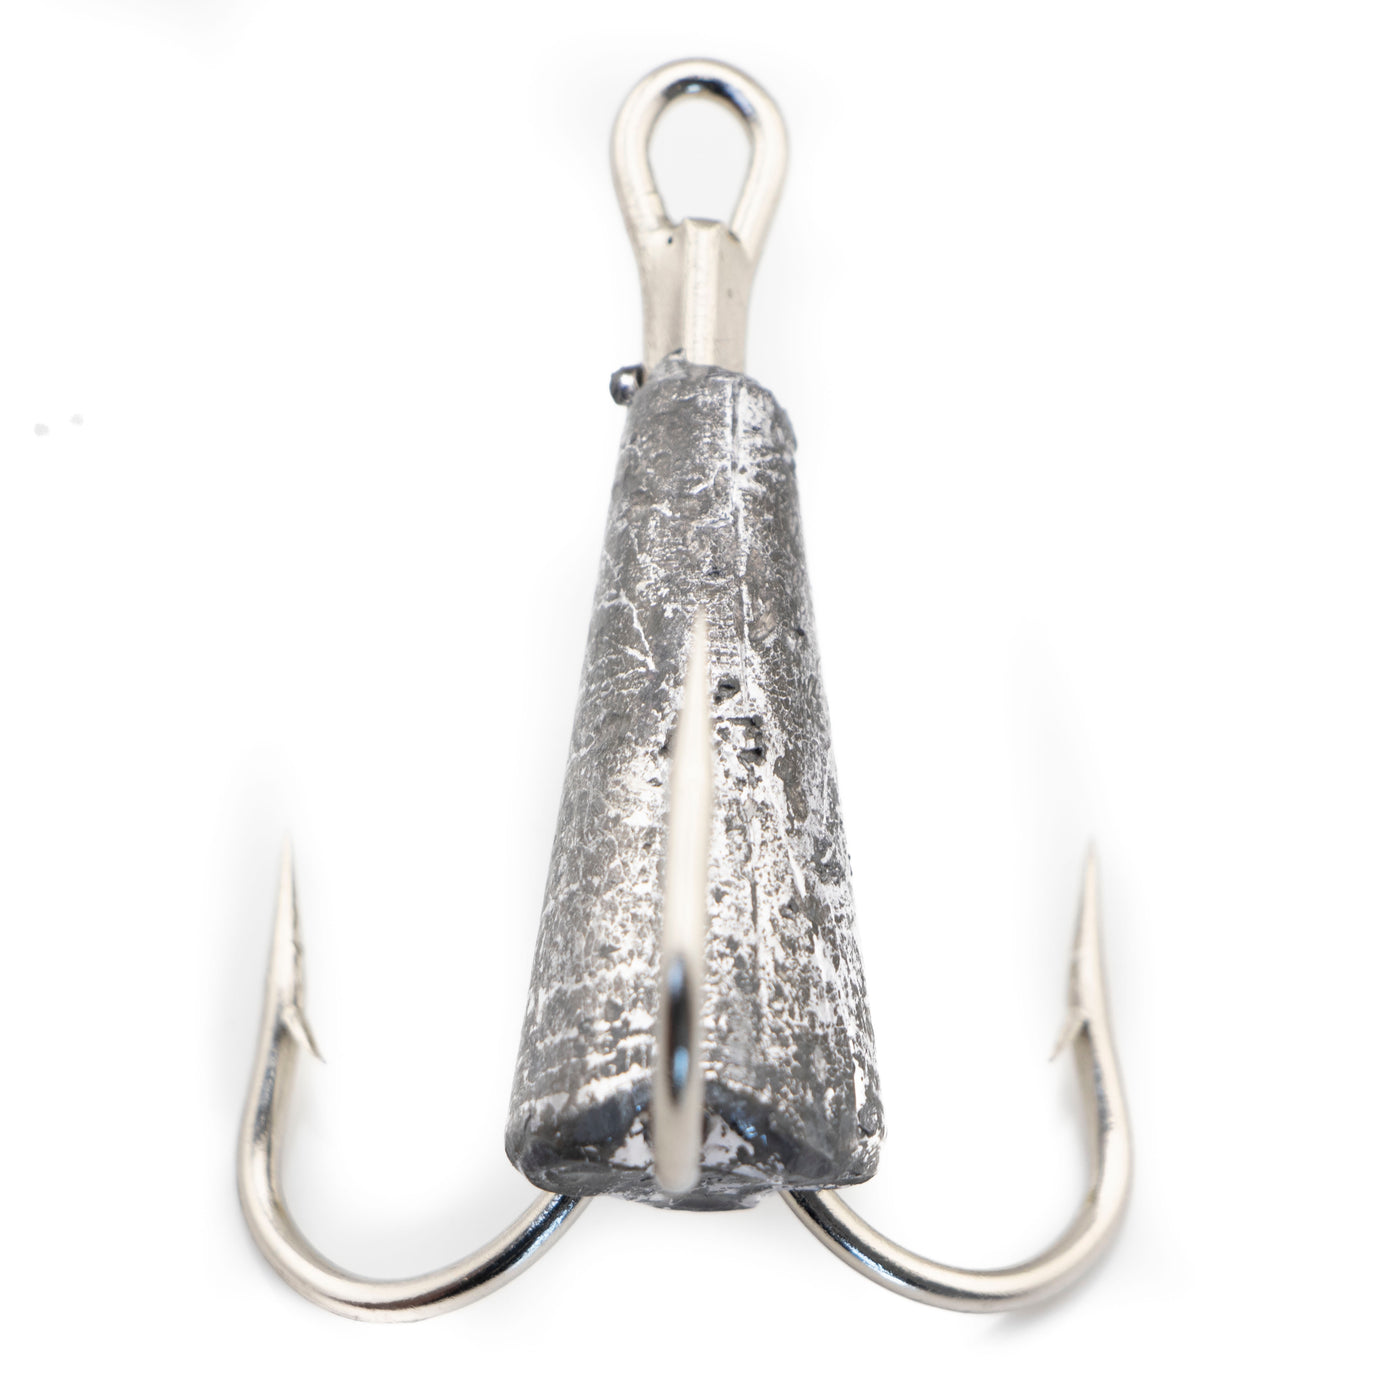 NEW 2pcs Snagging Hooks Snagging Weighted Treble Hooks Large